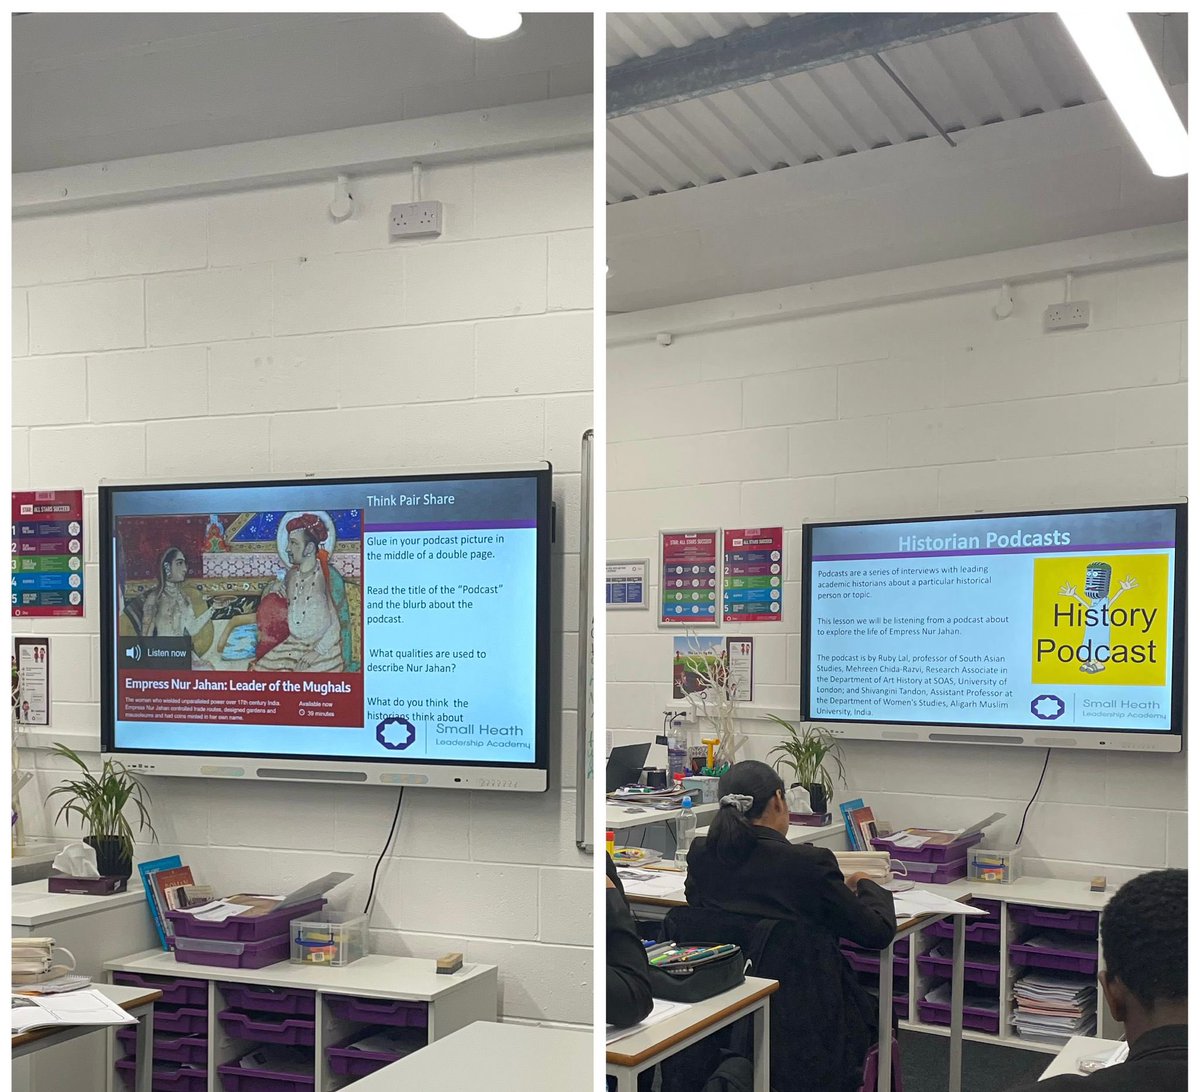 See our Year 8 history students listening to a BBC podcast on Nur Jahan to consider the different interpretations presented by historians. @mchidarazvi @rajandatar @histassoc #rubylal #herstory #CulturalCapital